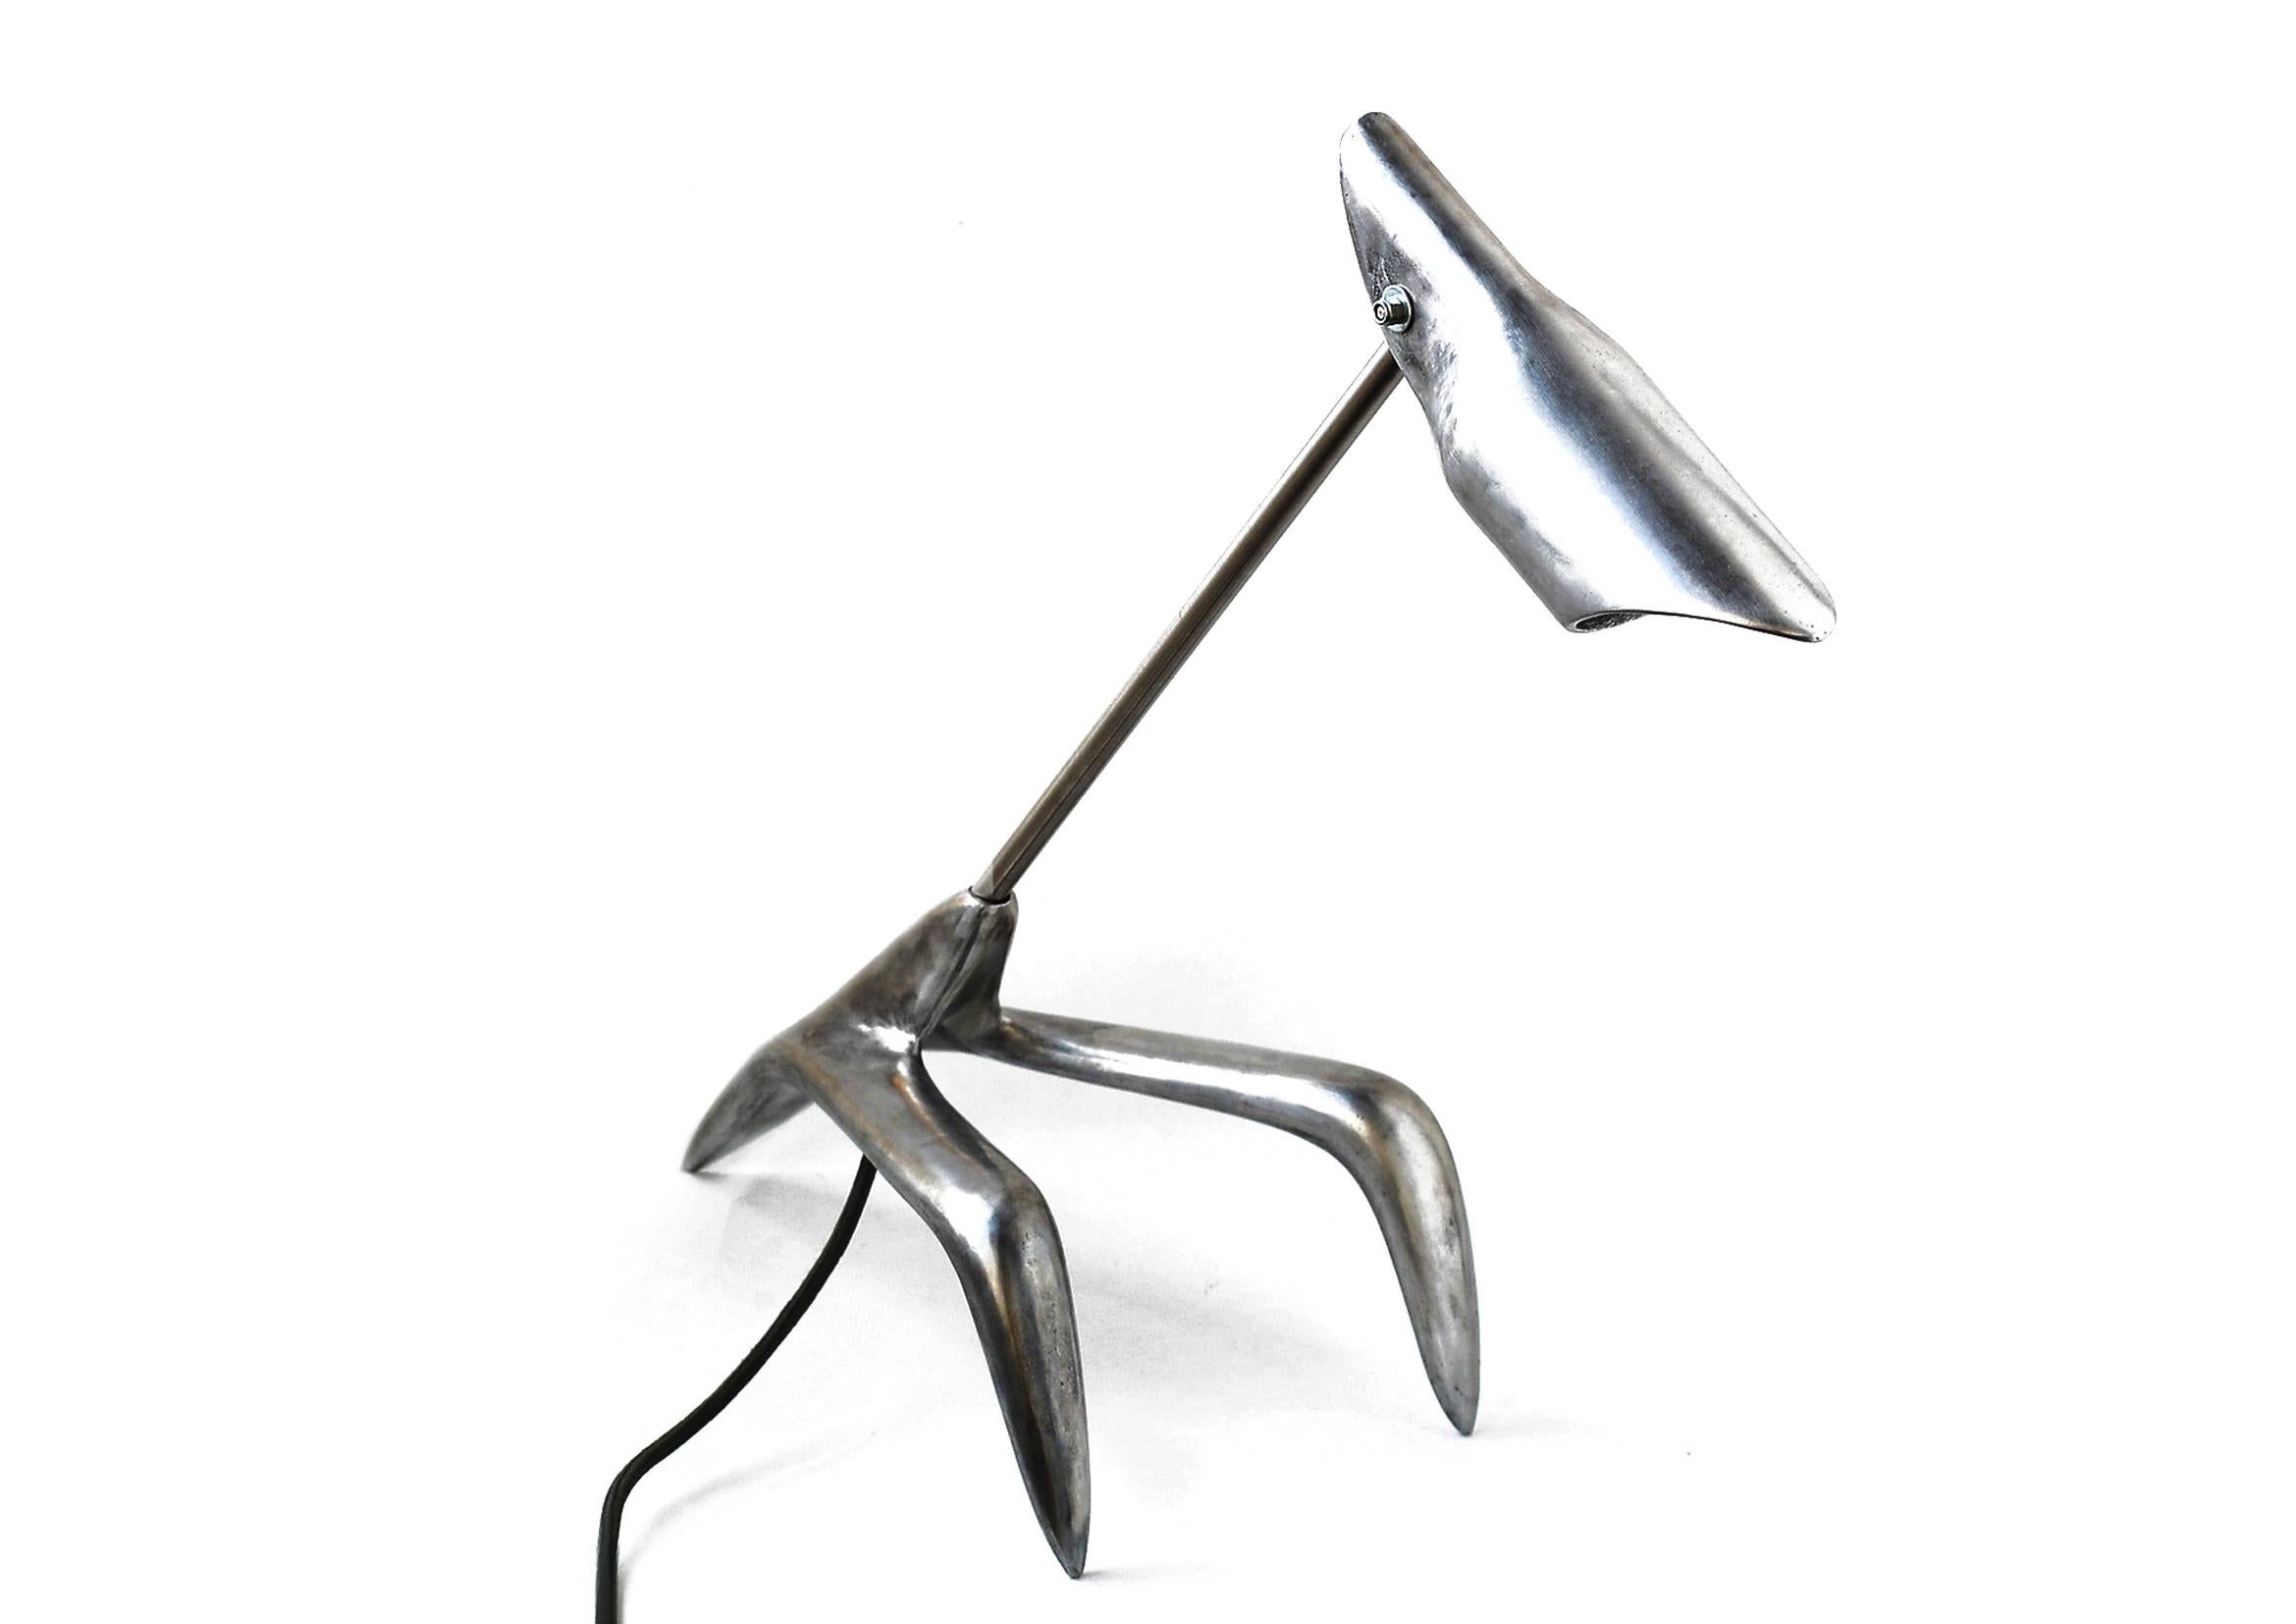 Barracuda Desk Lamp by Lucio Rossi
Dimensions: D 20 x W 65  x H 45  cm
Material: Aluminum, Stainless steel.
Weight: 2,35kg

The Barracuda is a desk lamp designed for large tables, with an adjustable  head that rotates 360° and tilts. The collectible